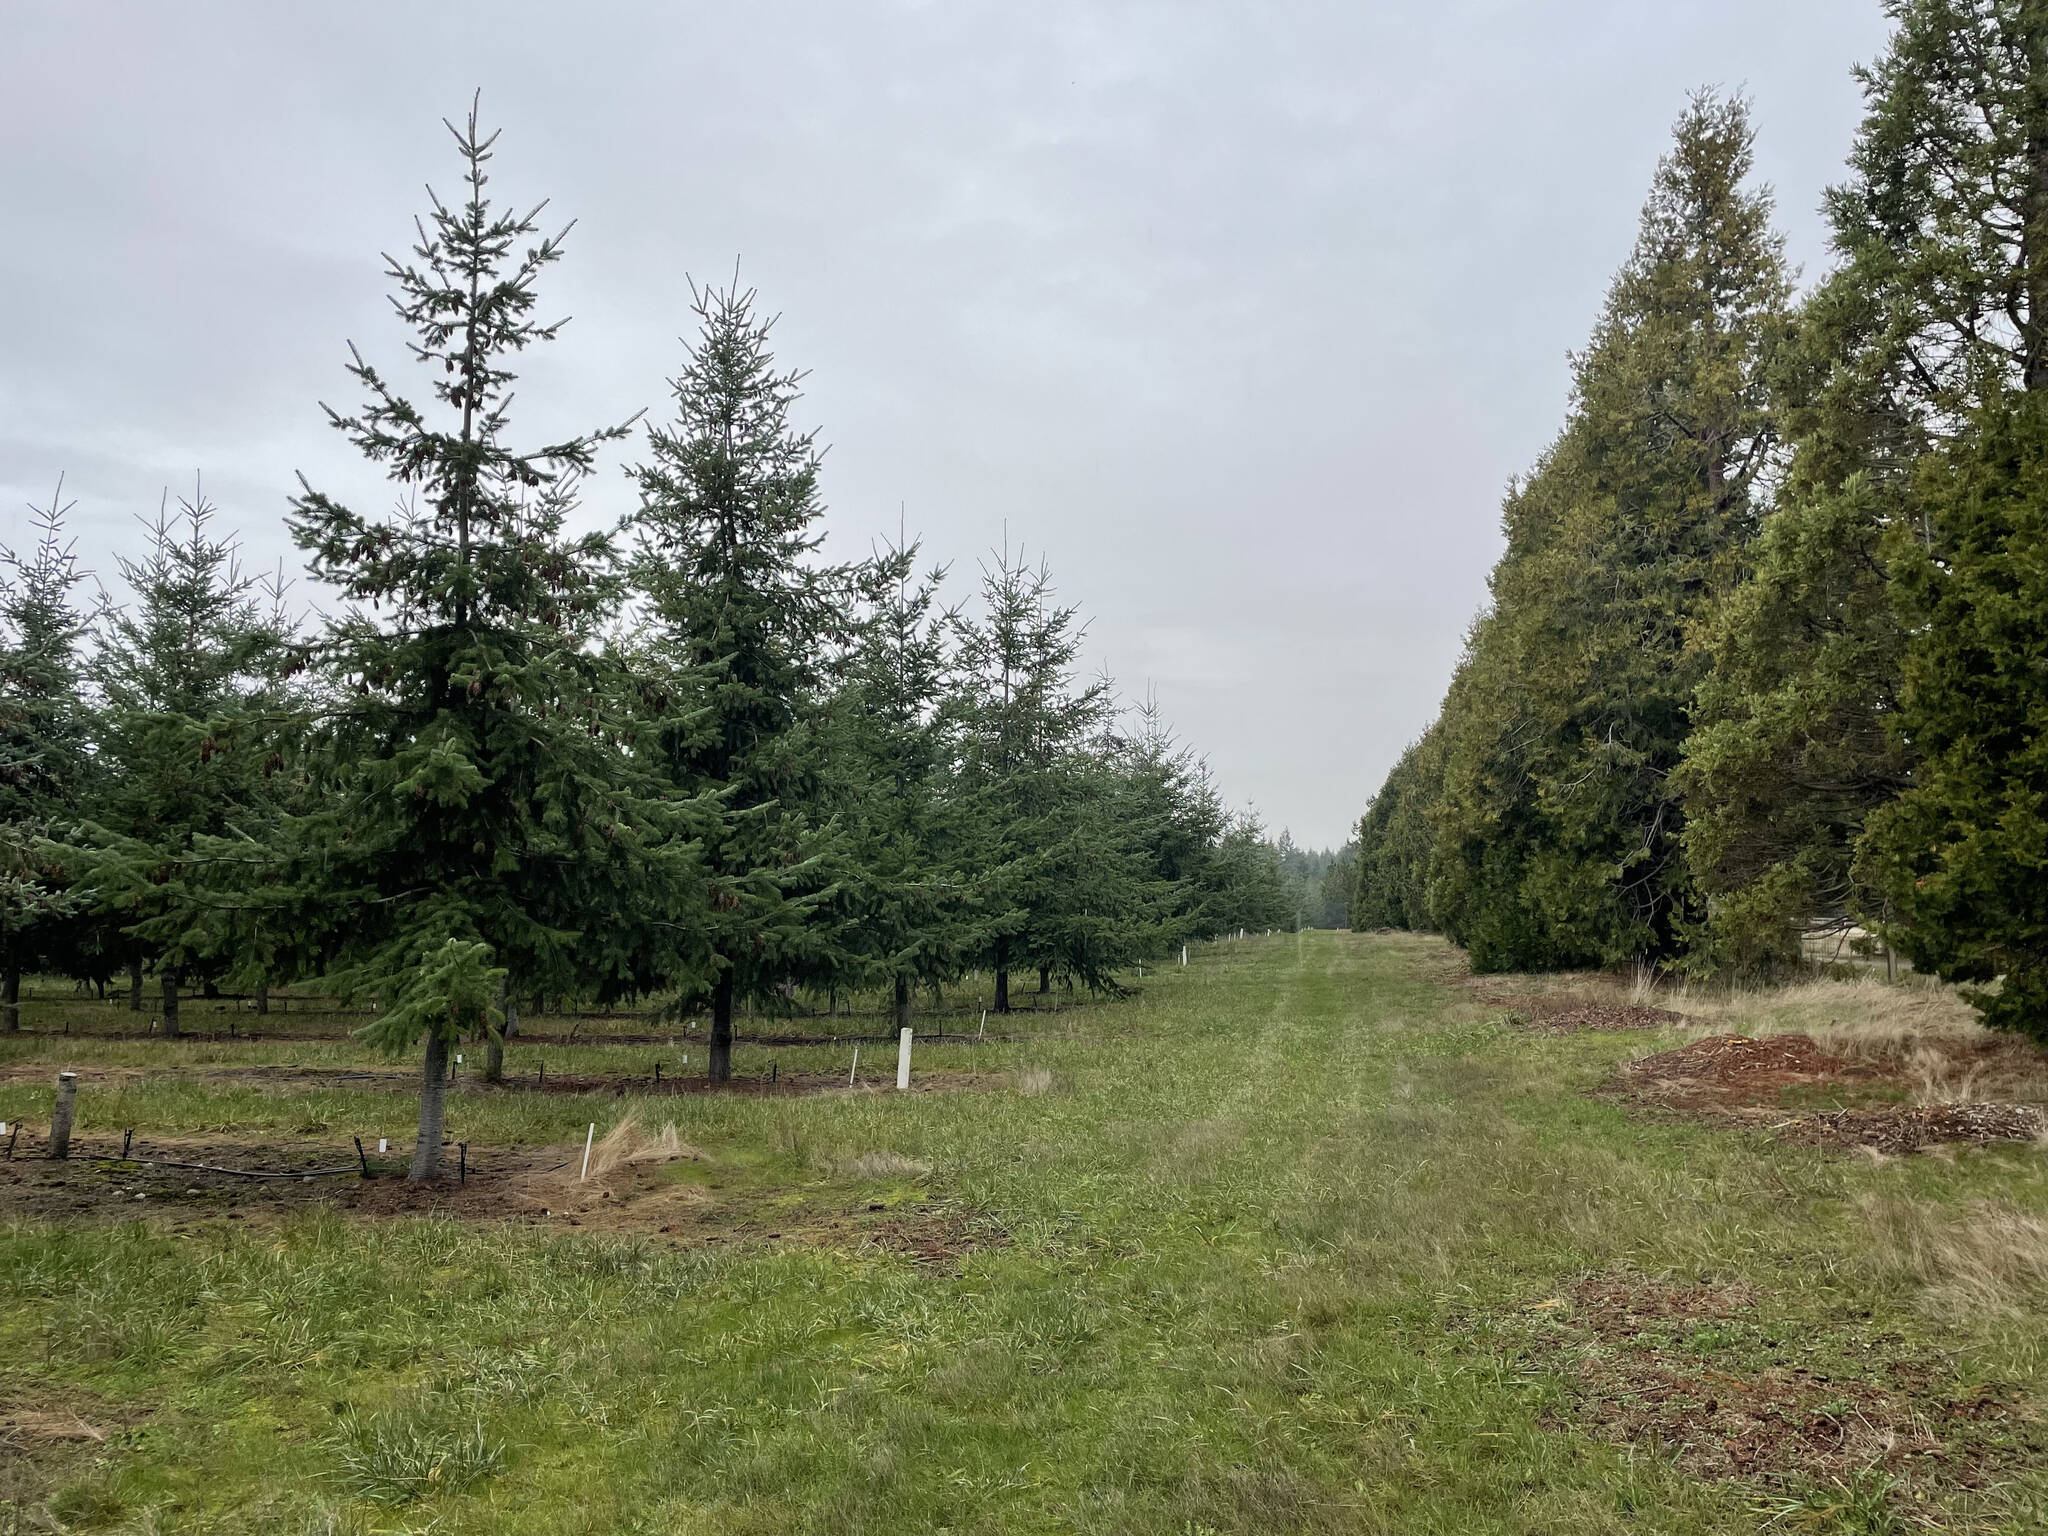 Island Transit has acquired a new 38-acre property in Coupeville. (Photo provided)